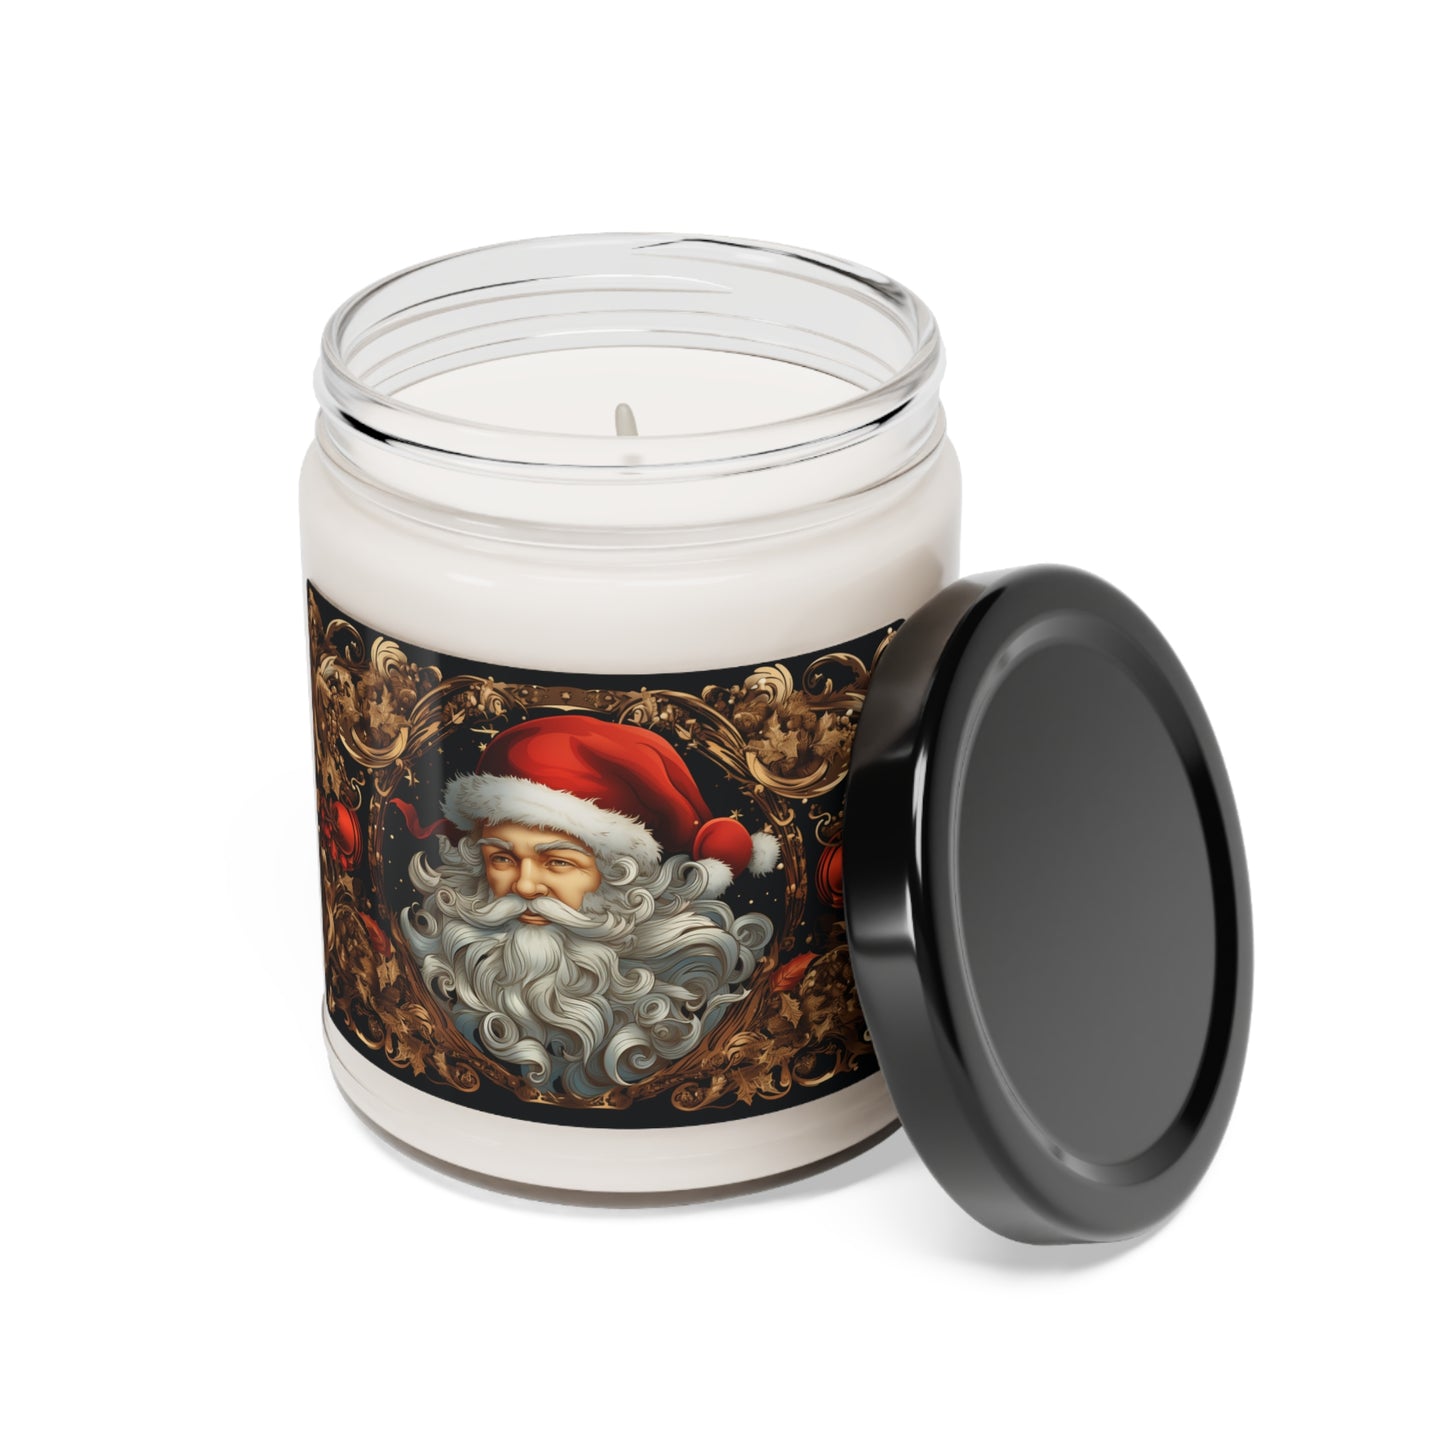 Santa Clause | Scented Soy Candle | 9oz |  50-60 hours of Burning Time